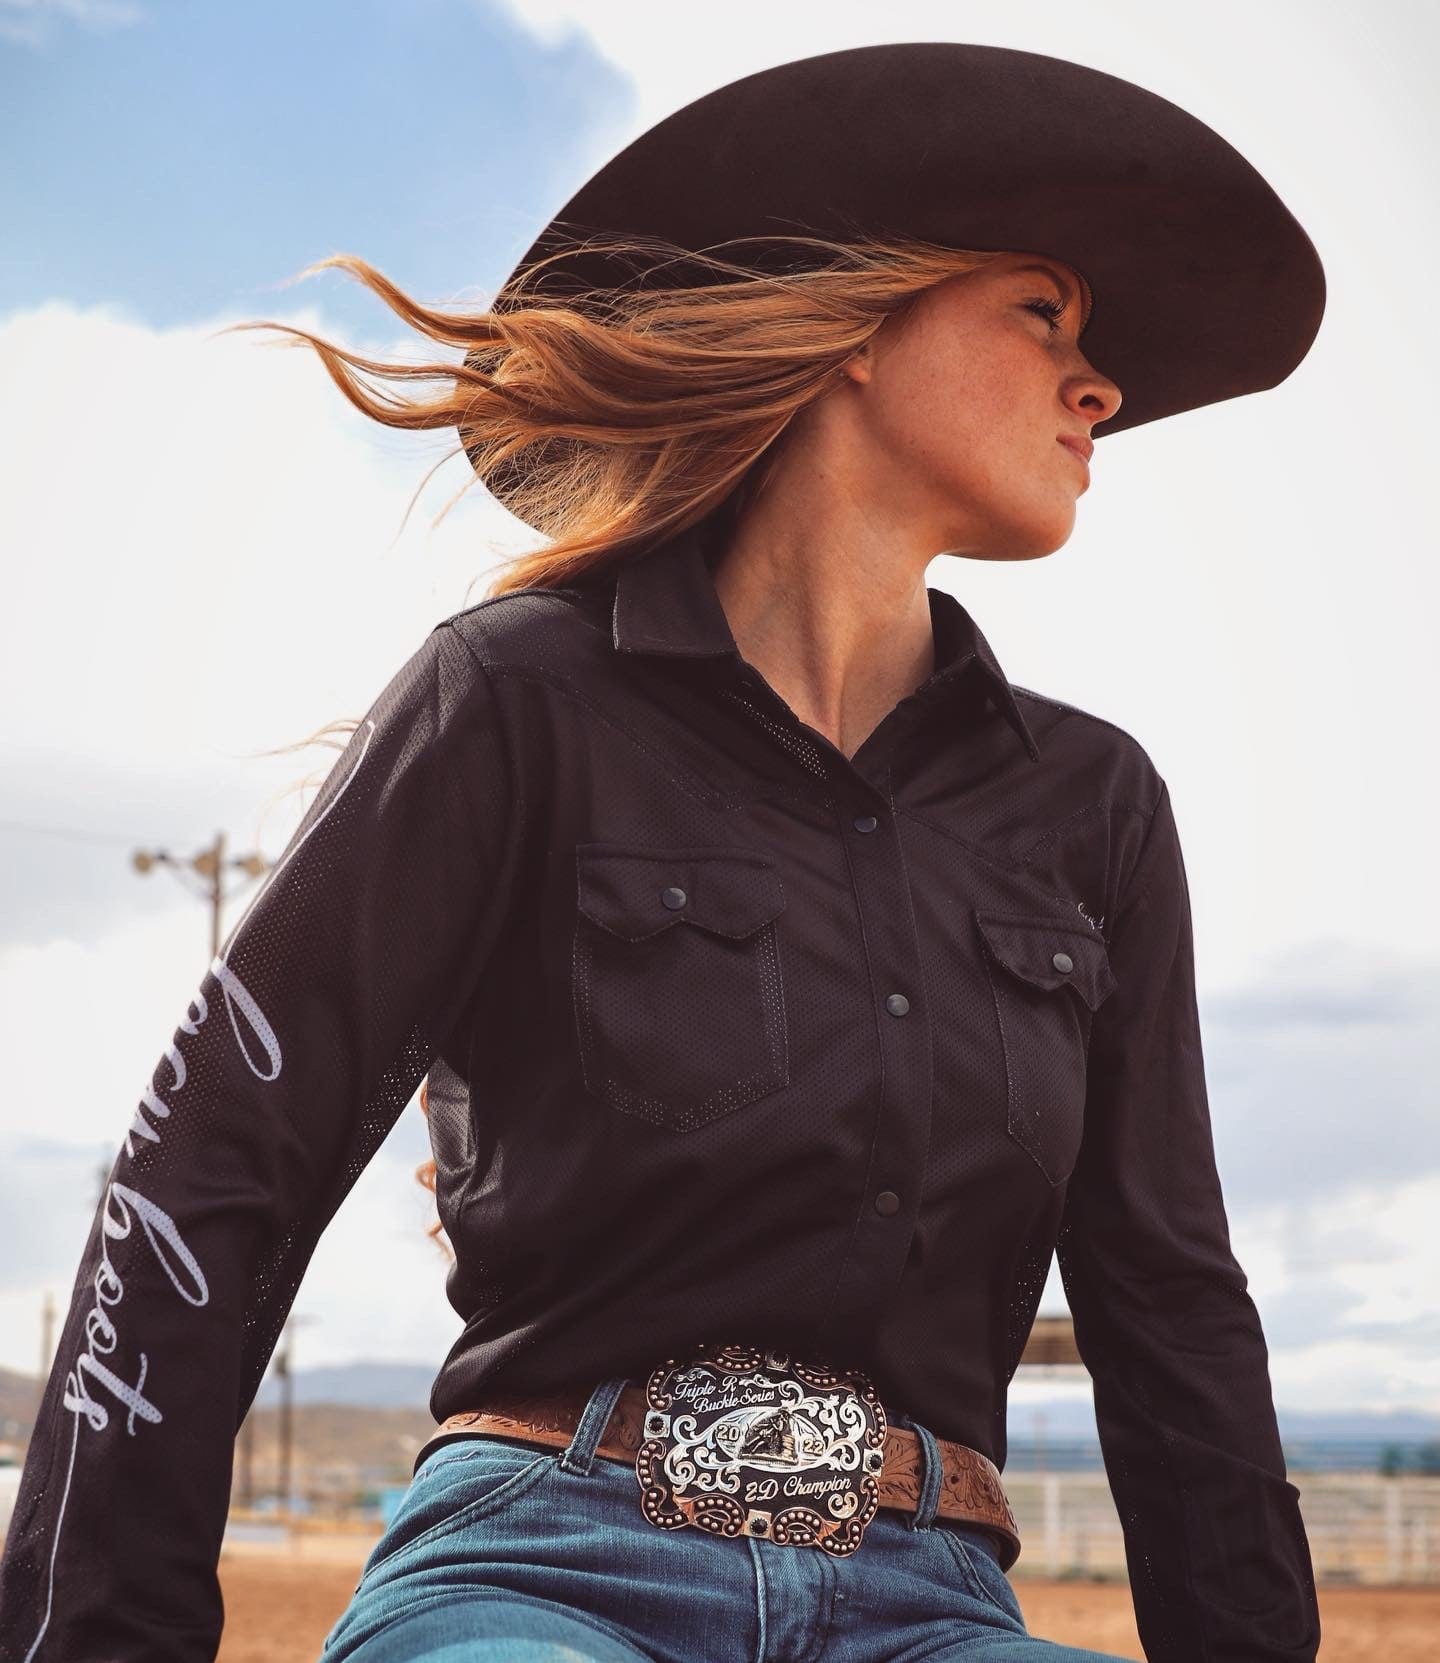 Lacy Boots Shirts Cool Cowgirl® Perforated Cooling Shirts! Solid Black with "Lacy Boots" Down Arm